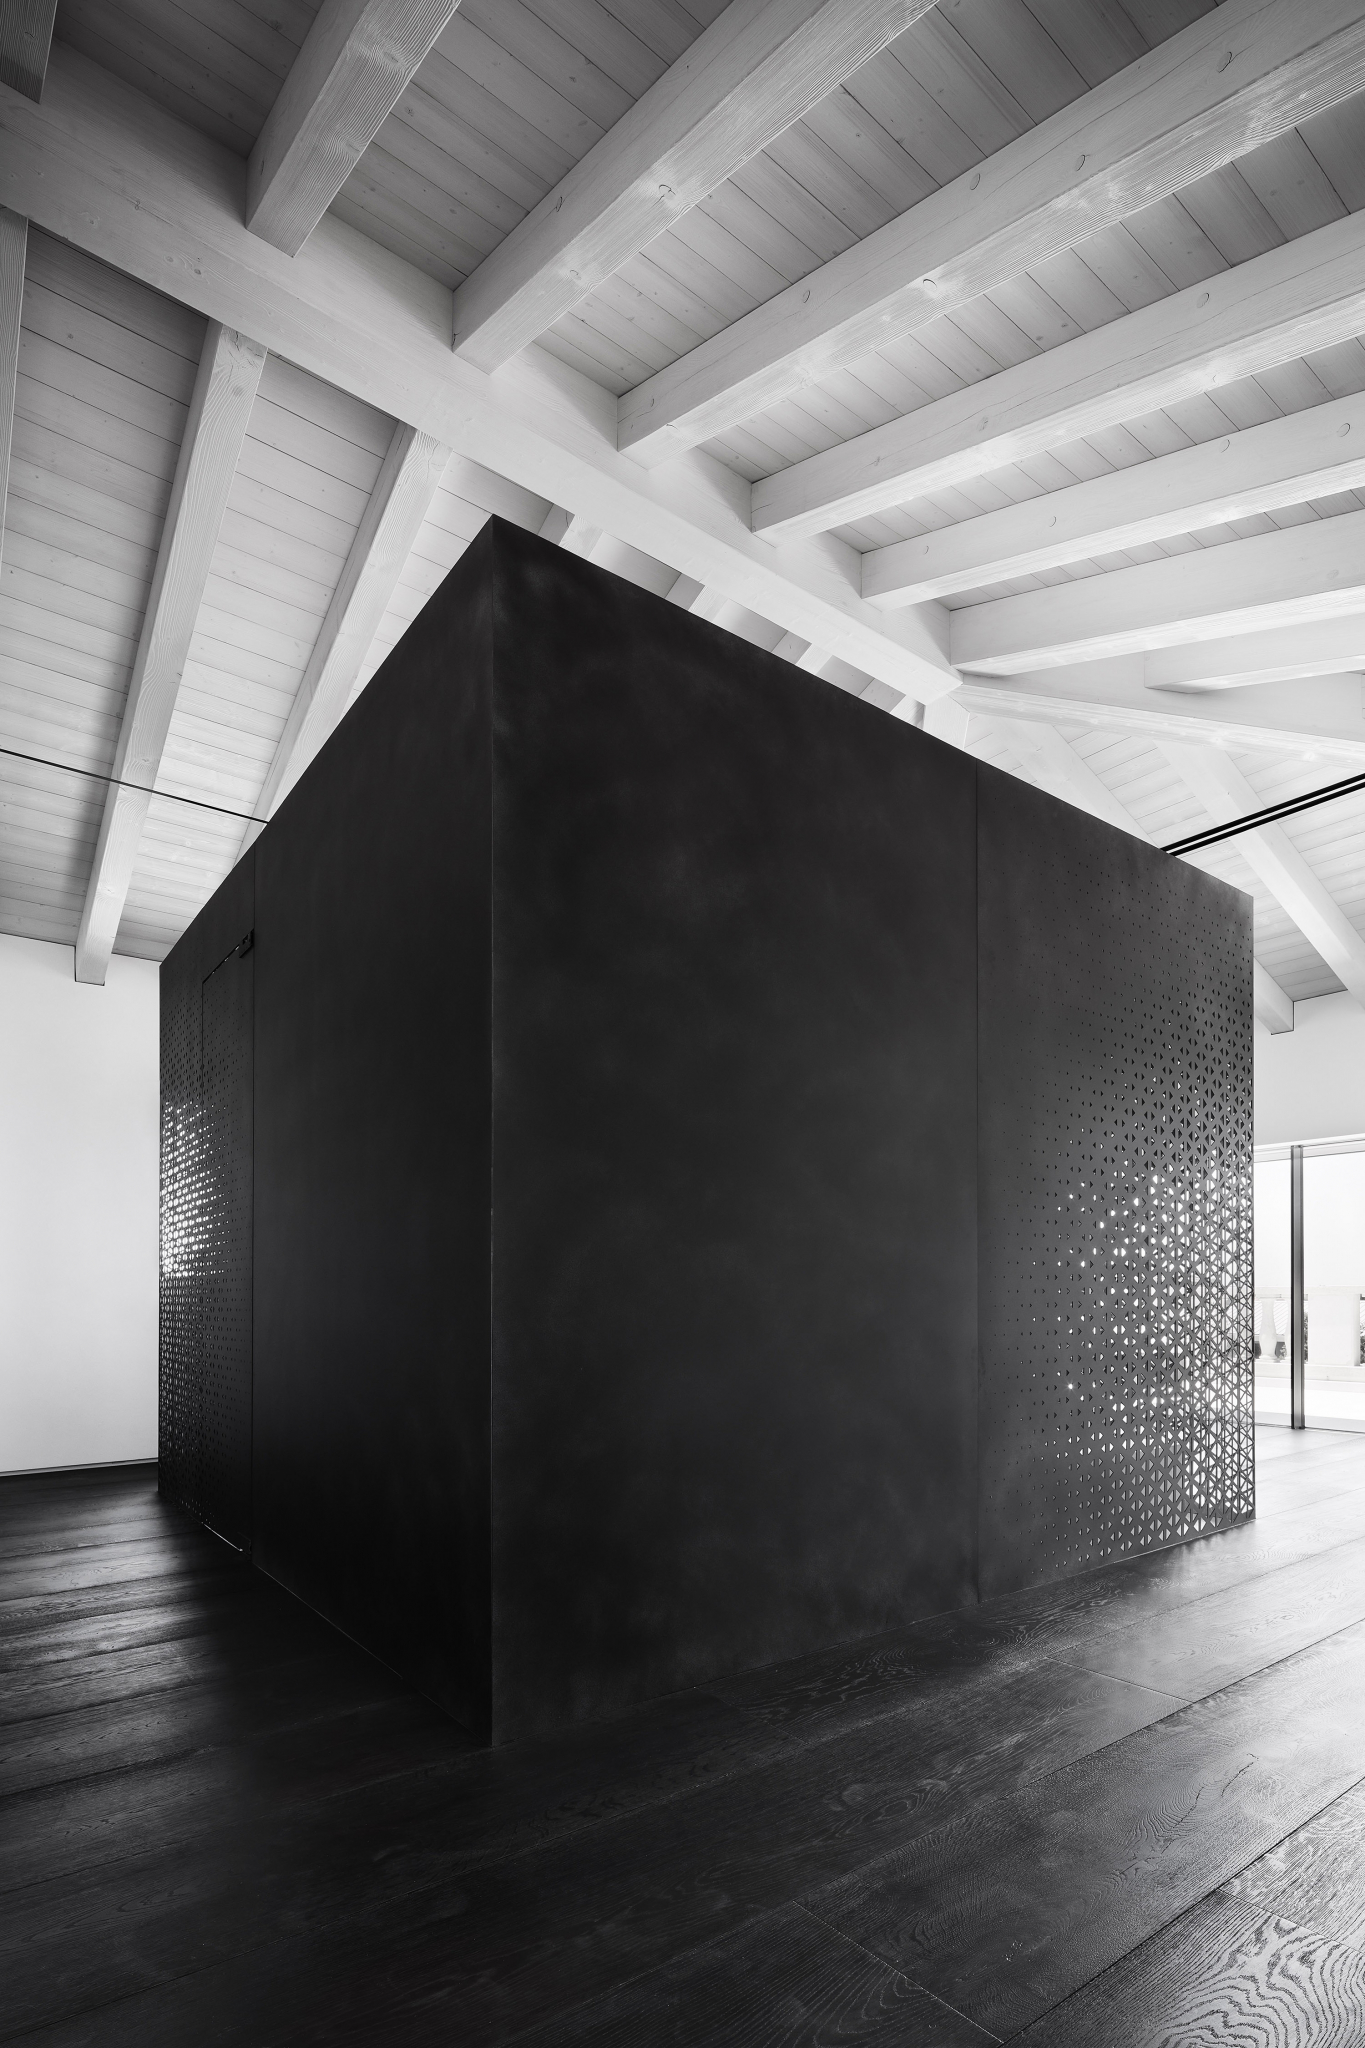 A METAL CUBE - Alessandro Isola